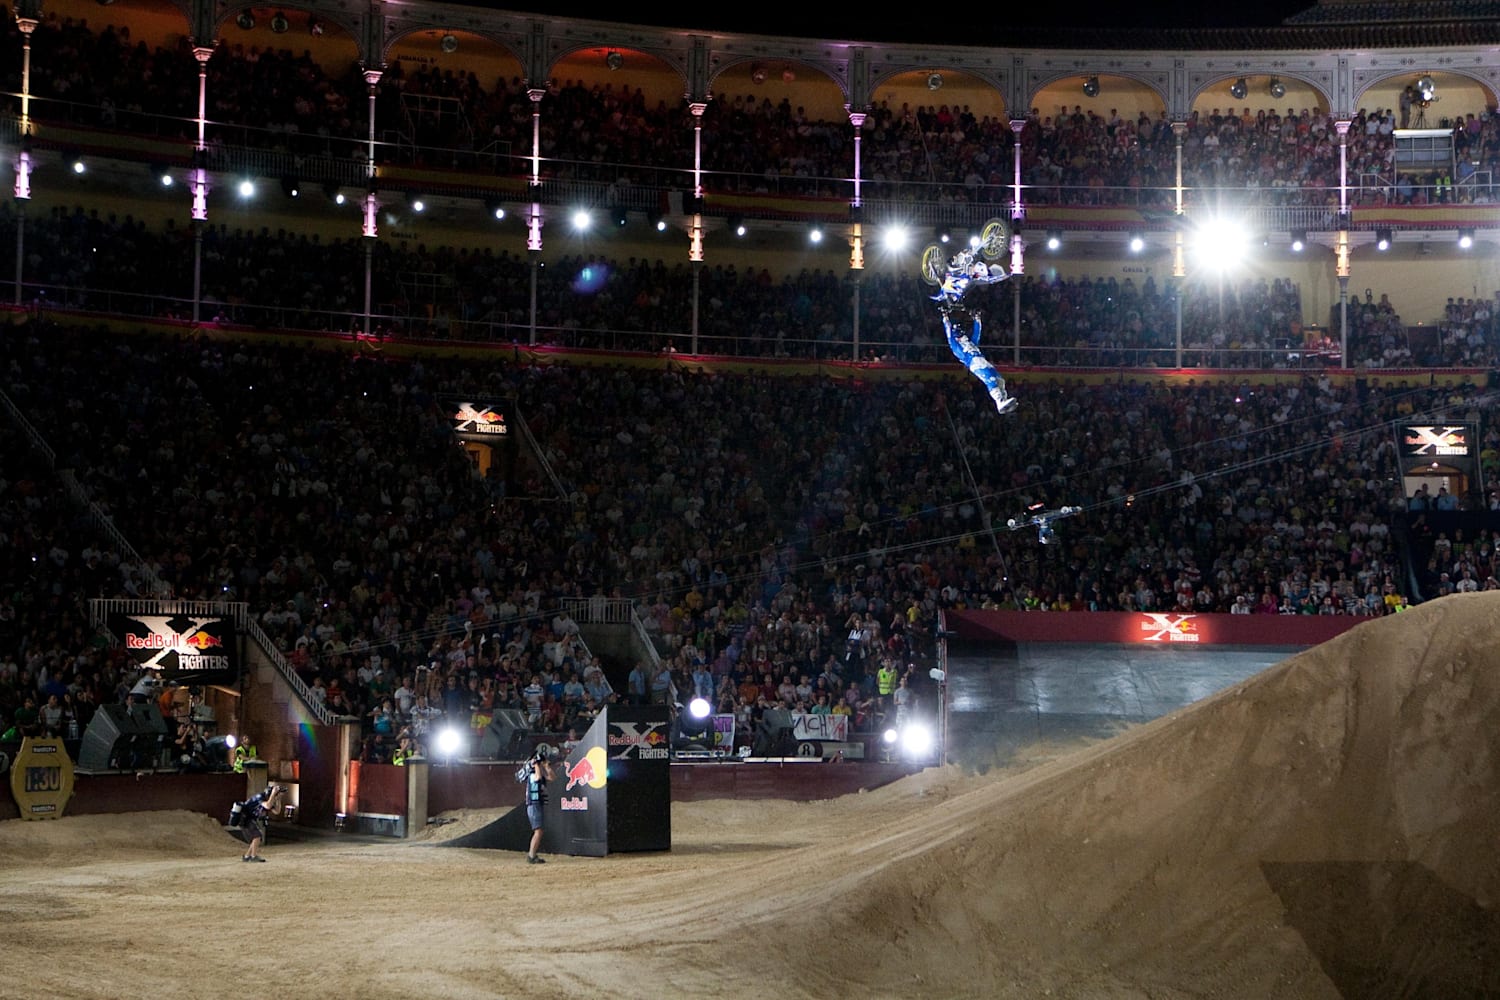 Best moments from Red Bull X-Fighters on video